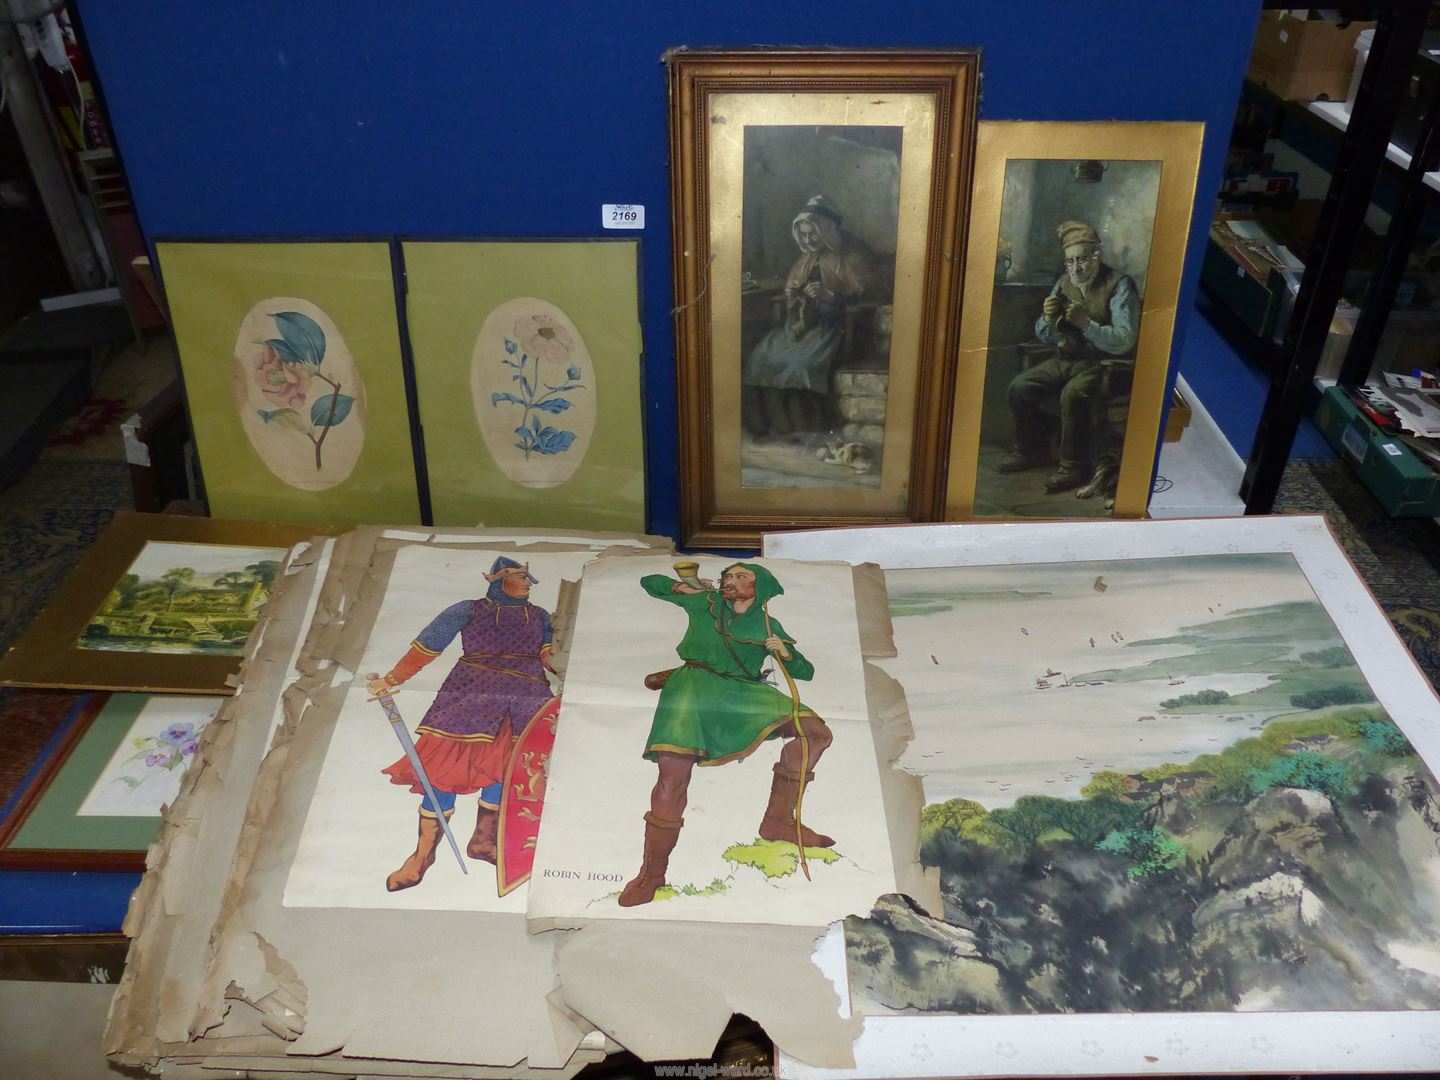 A quantity of prints including floral, Teacher's supplement prints including Robin Hood,